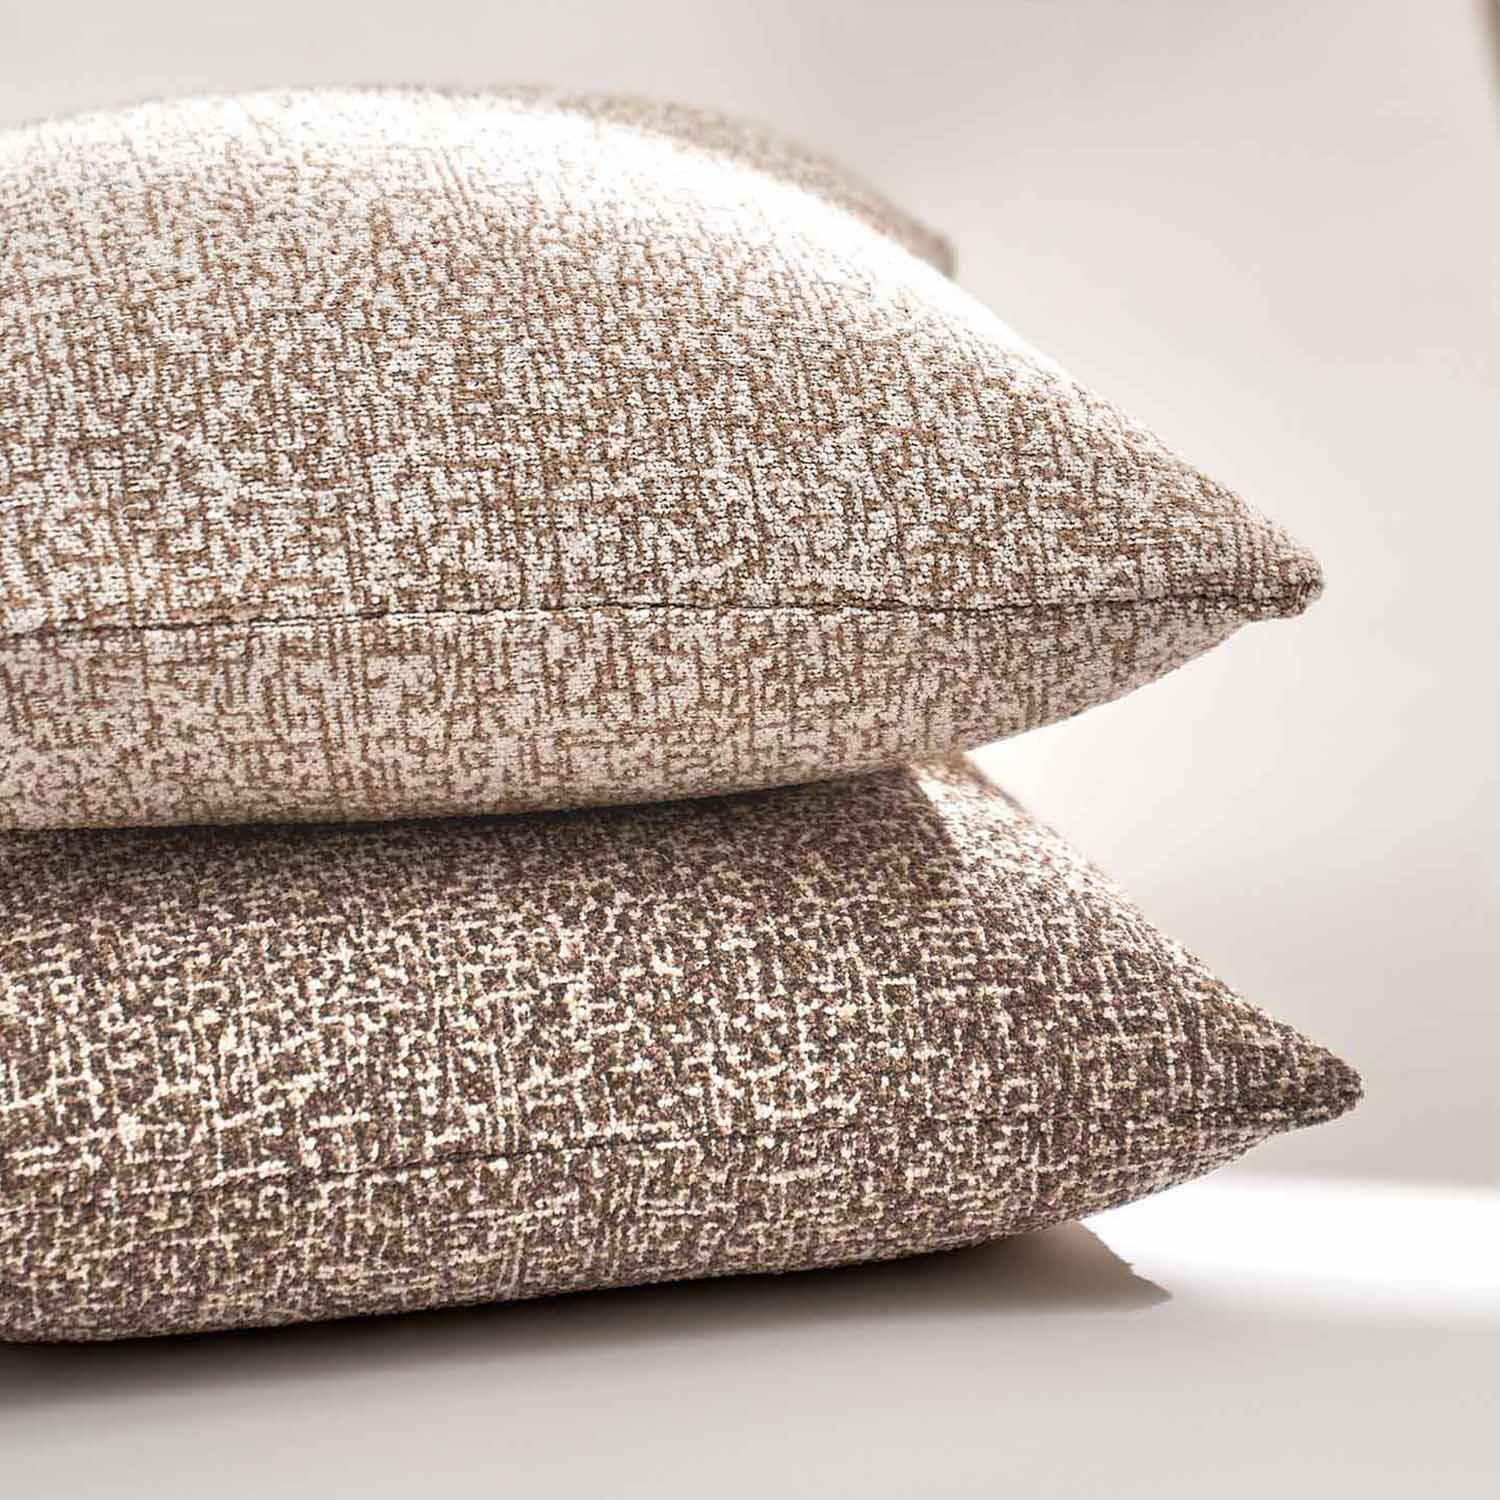 Riano Maze-Shaped Boucle Pillow Cover-